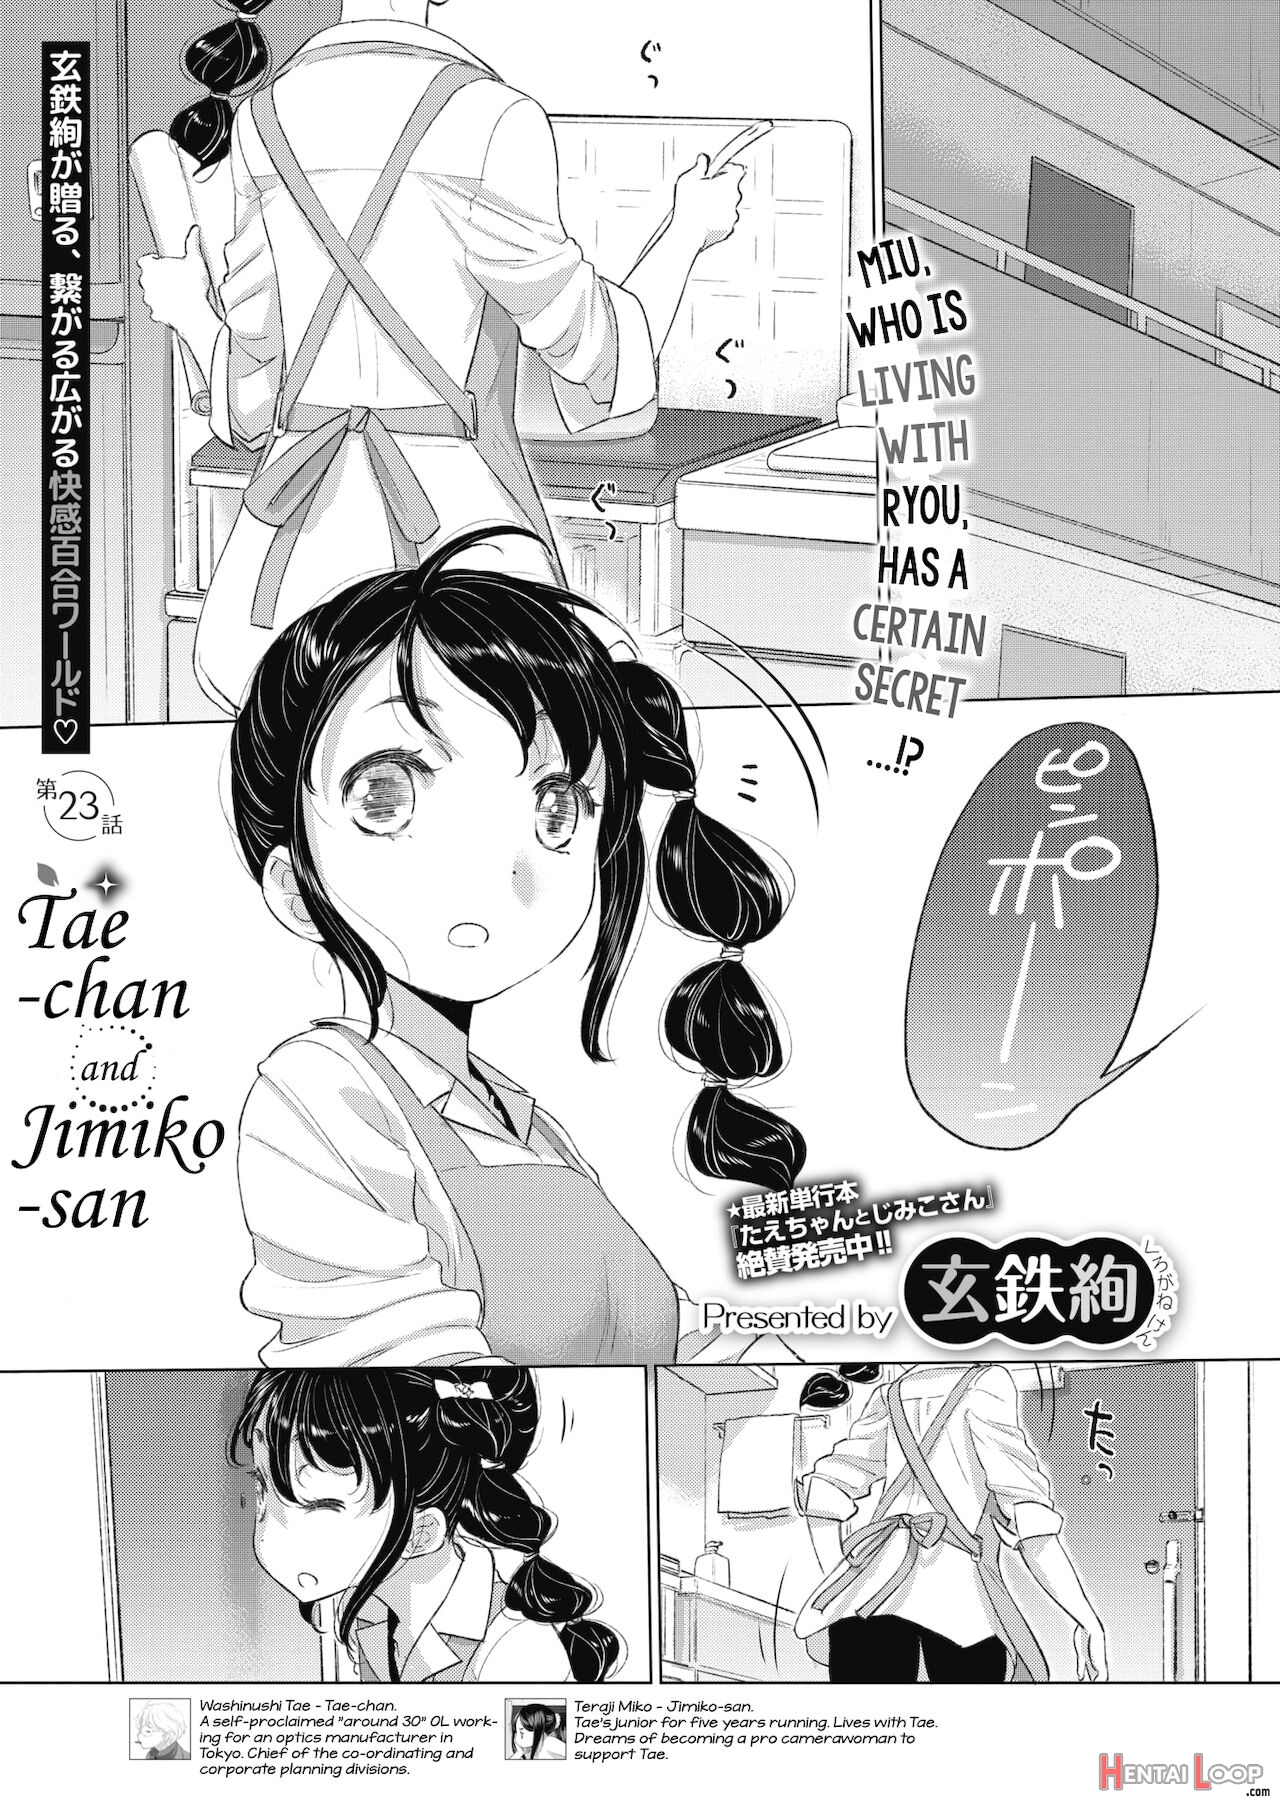 Tae-chan And Jimiko-san Ch. 1-25 page 301